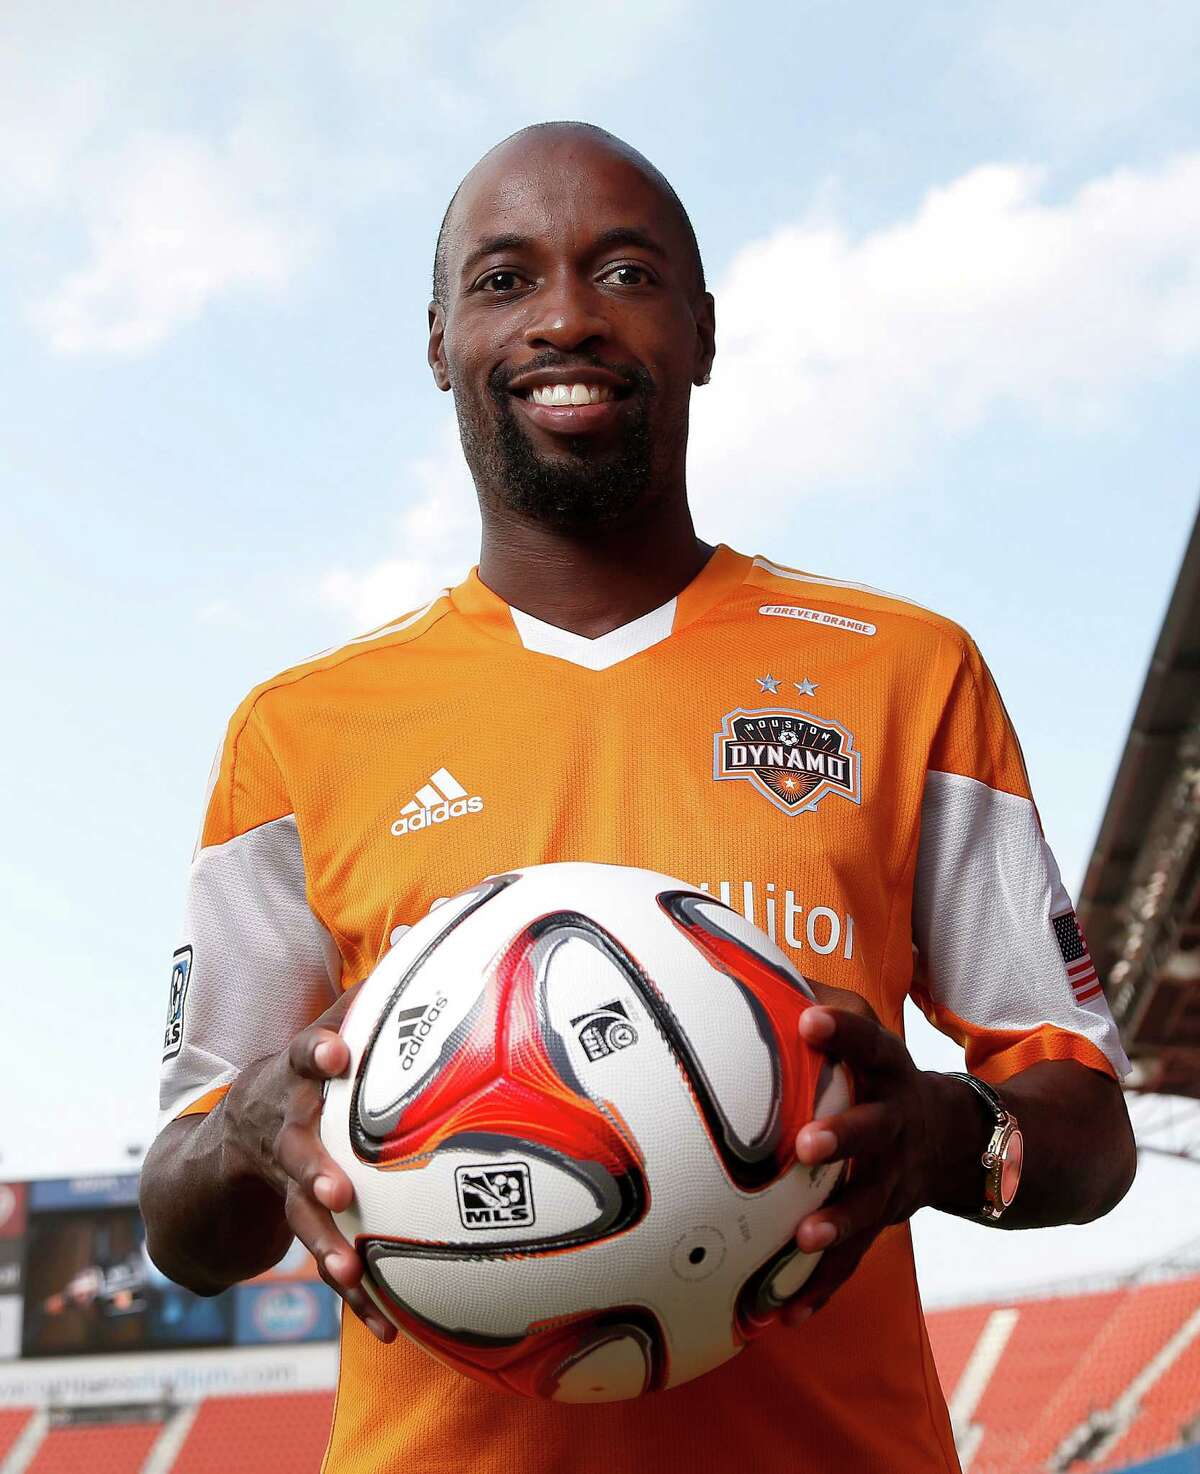 Houston Dynamo's new player DaMarcus Beasley poses for a portrait after a press conference to introduce him at the BBVA Compass Stadium, Thursday, July 24, 2014, in Houston. ( Karen Warren / Houston Chronicle )